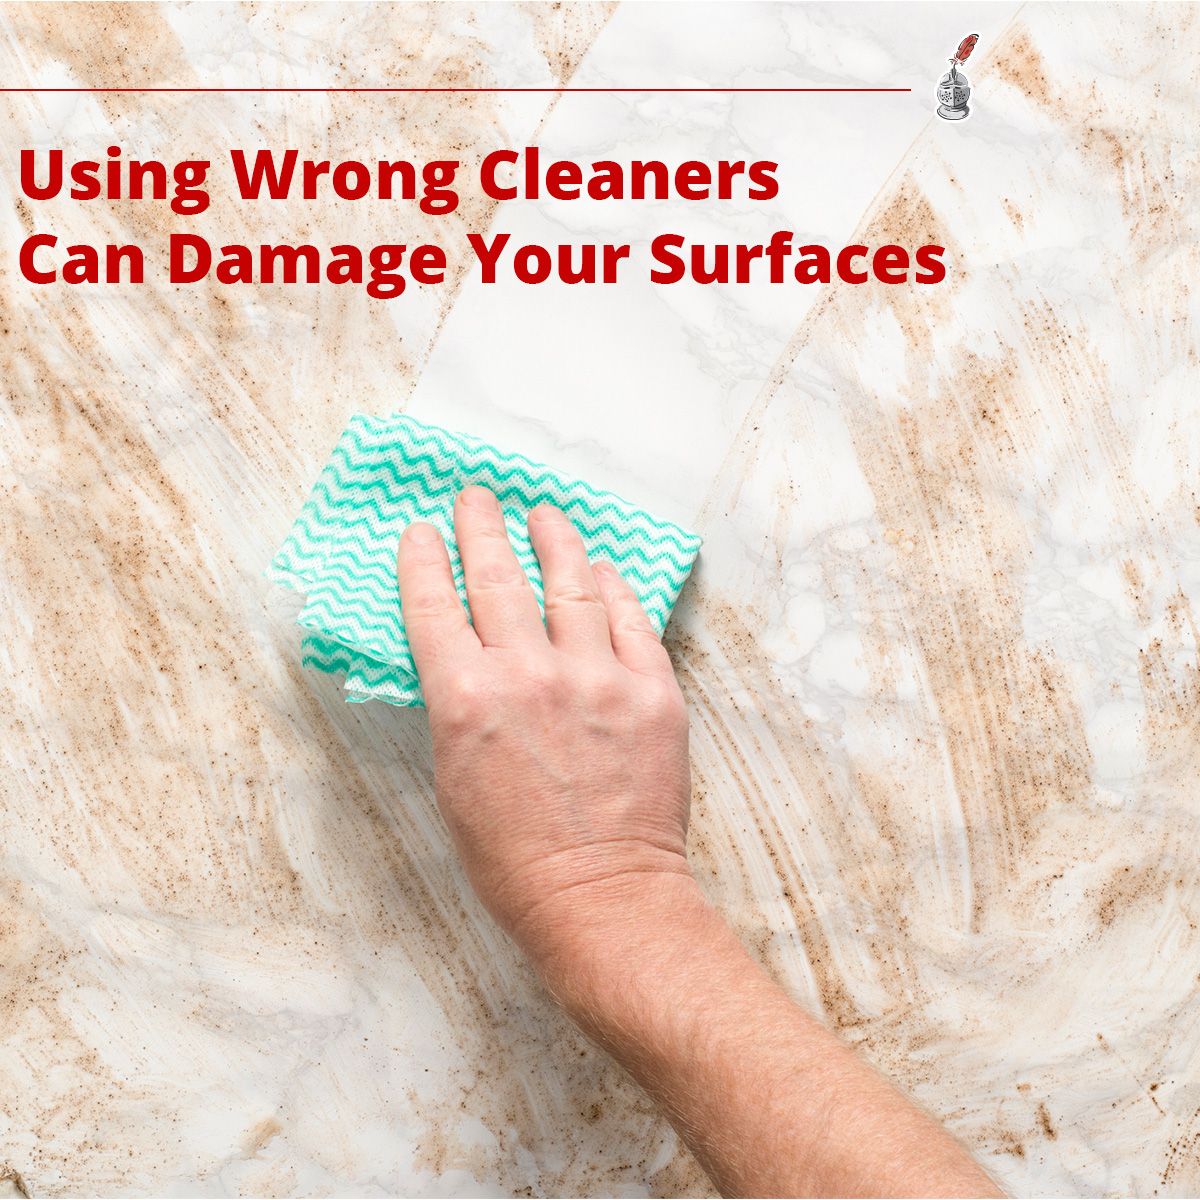 Using Wrong Cleaners Can Damage Your Surfaces